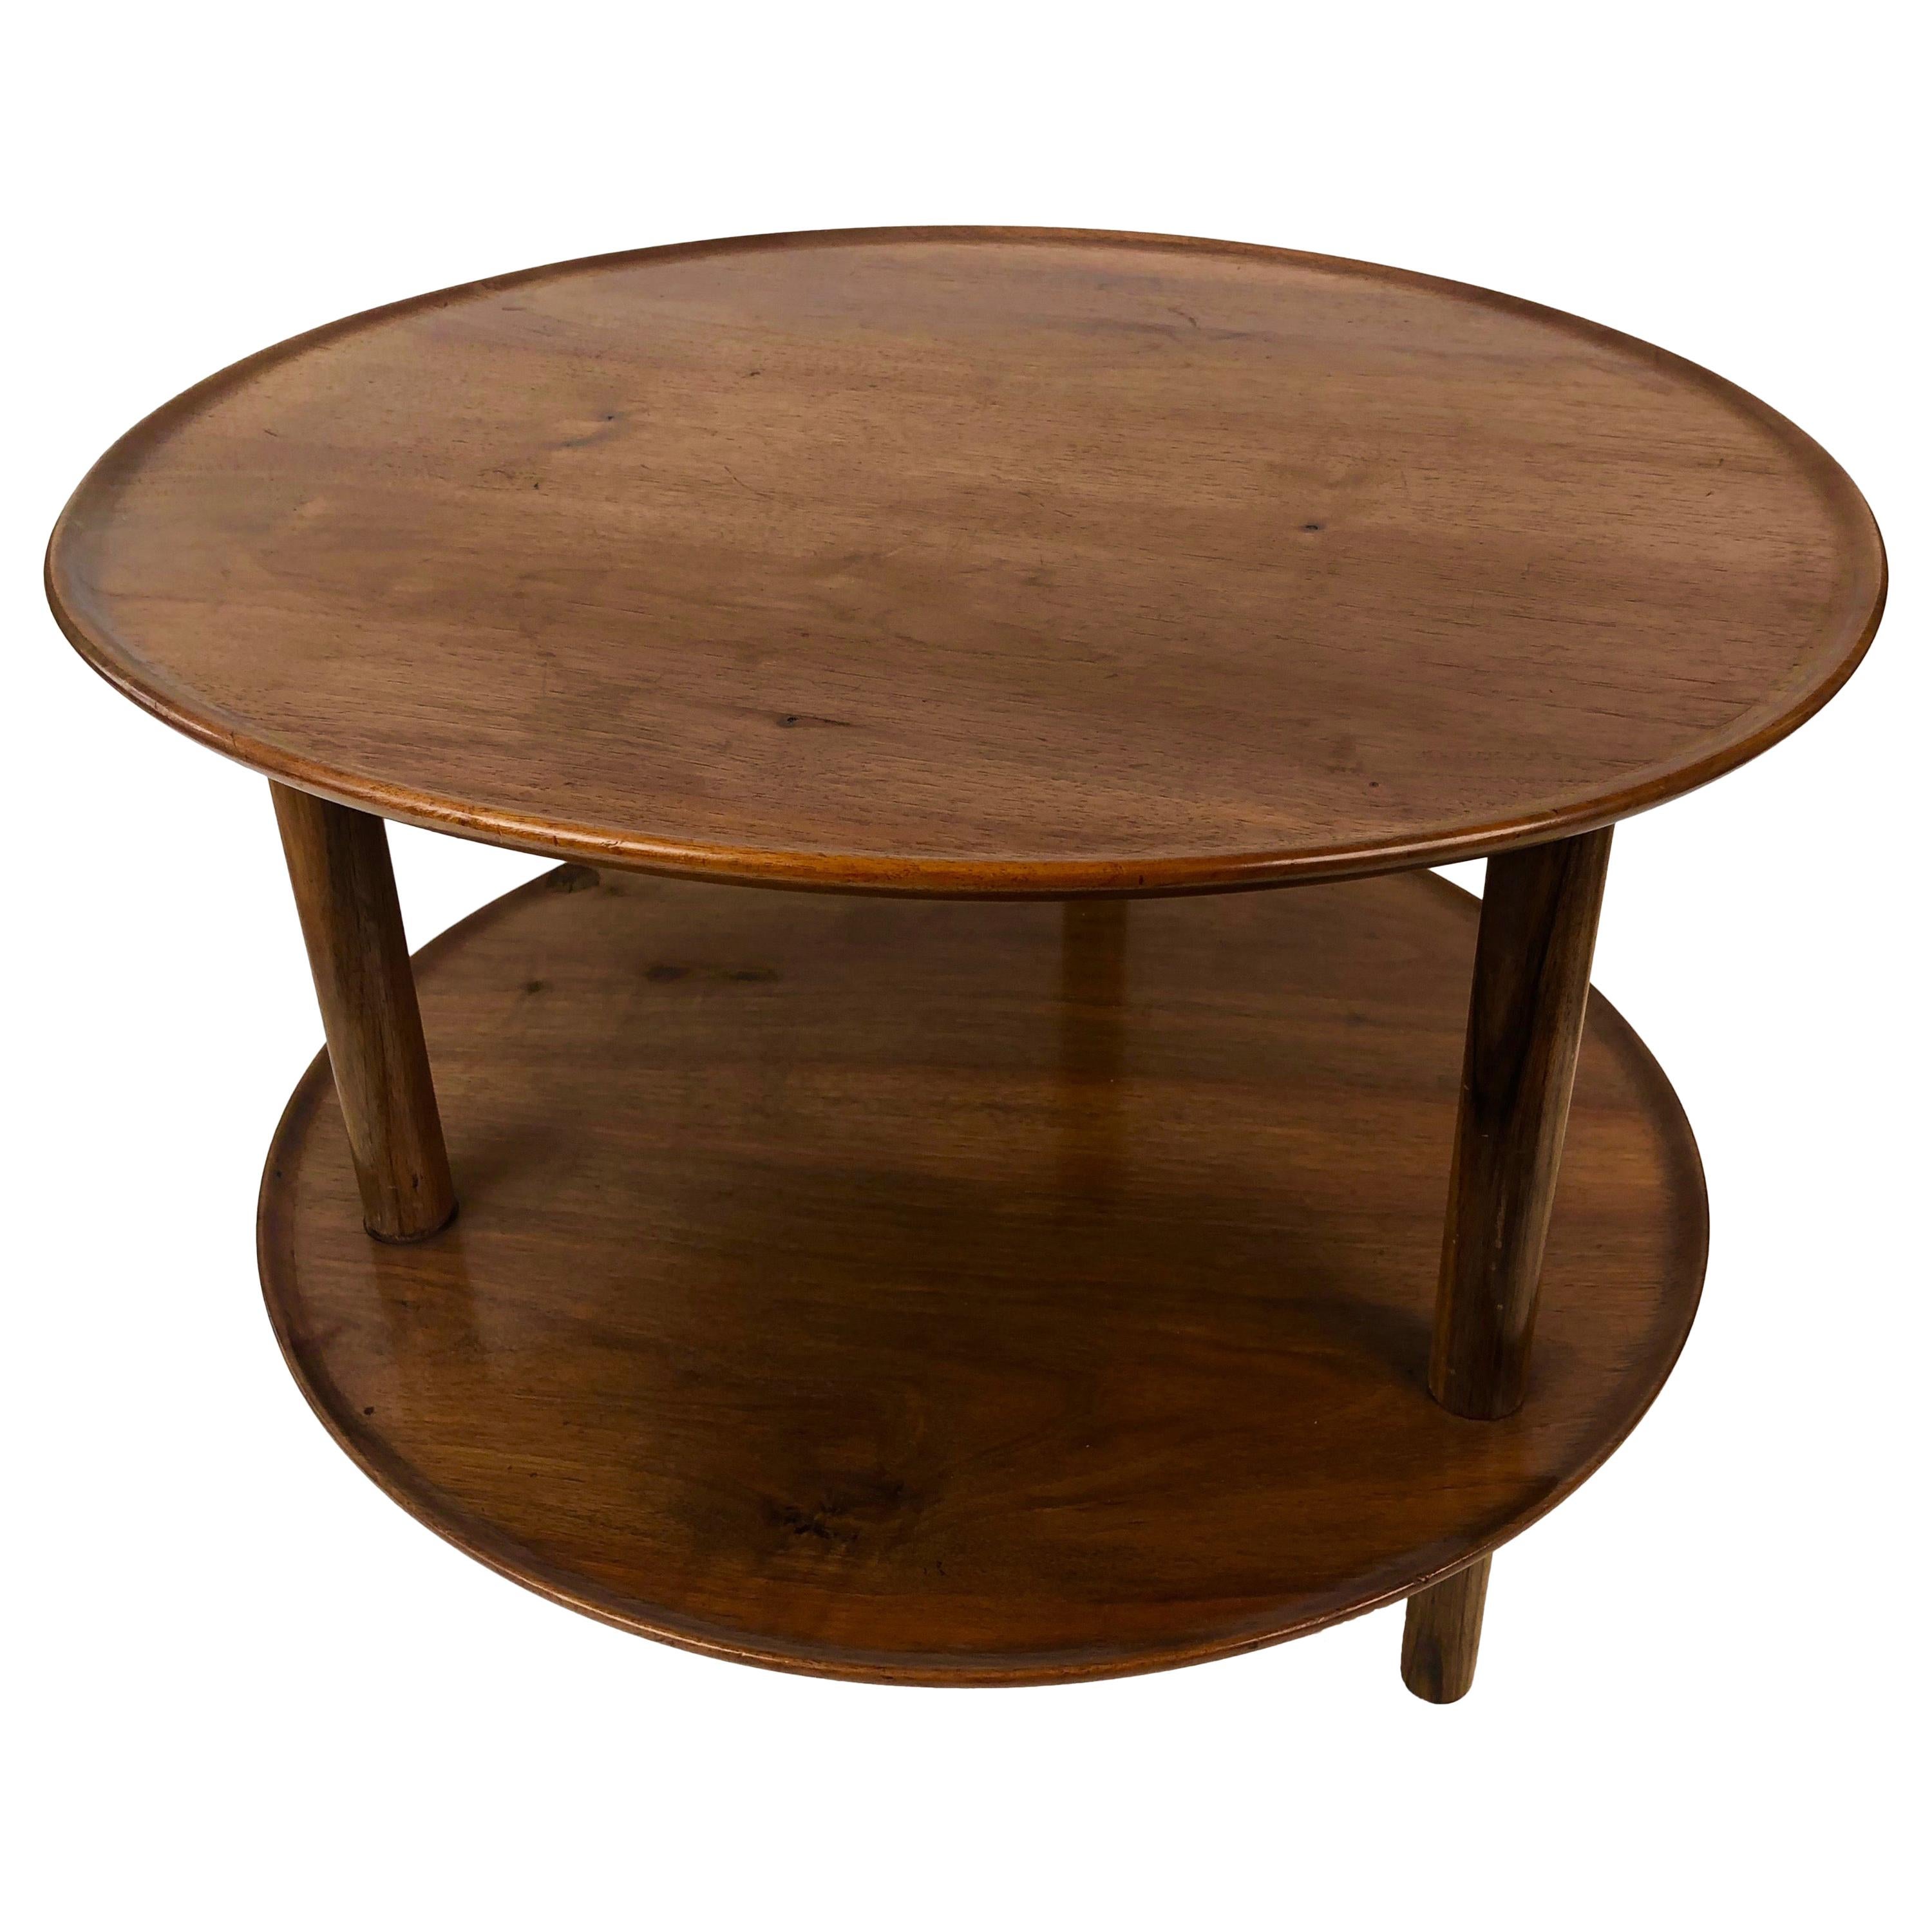 Coffee Table in Walnut from the 1930s, Designed by Josef Frank